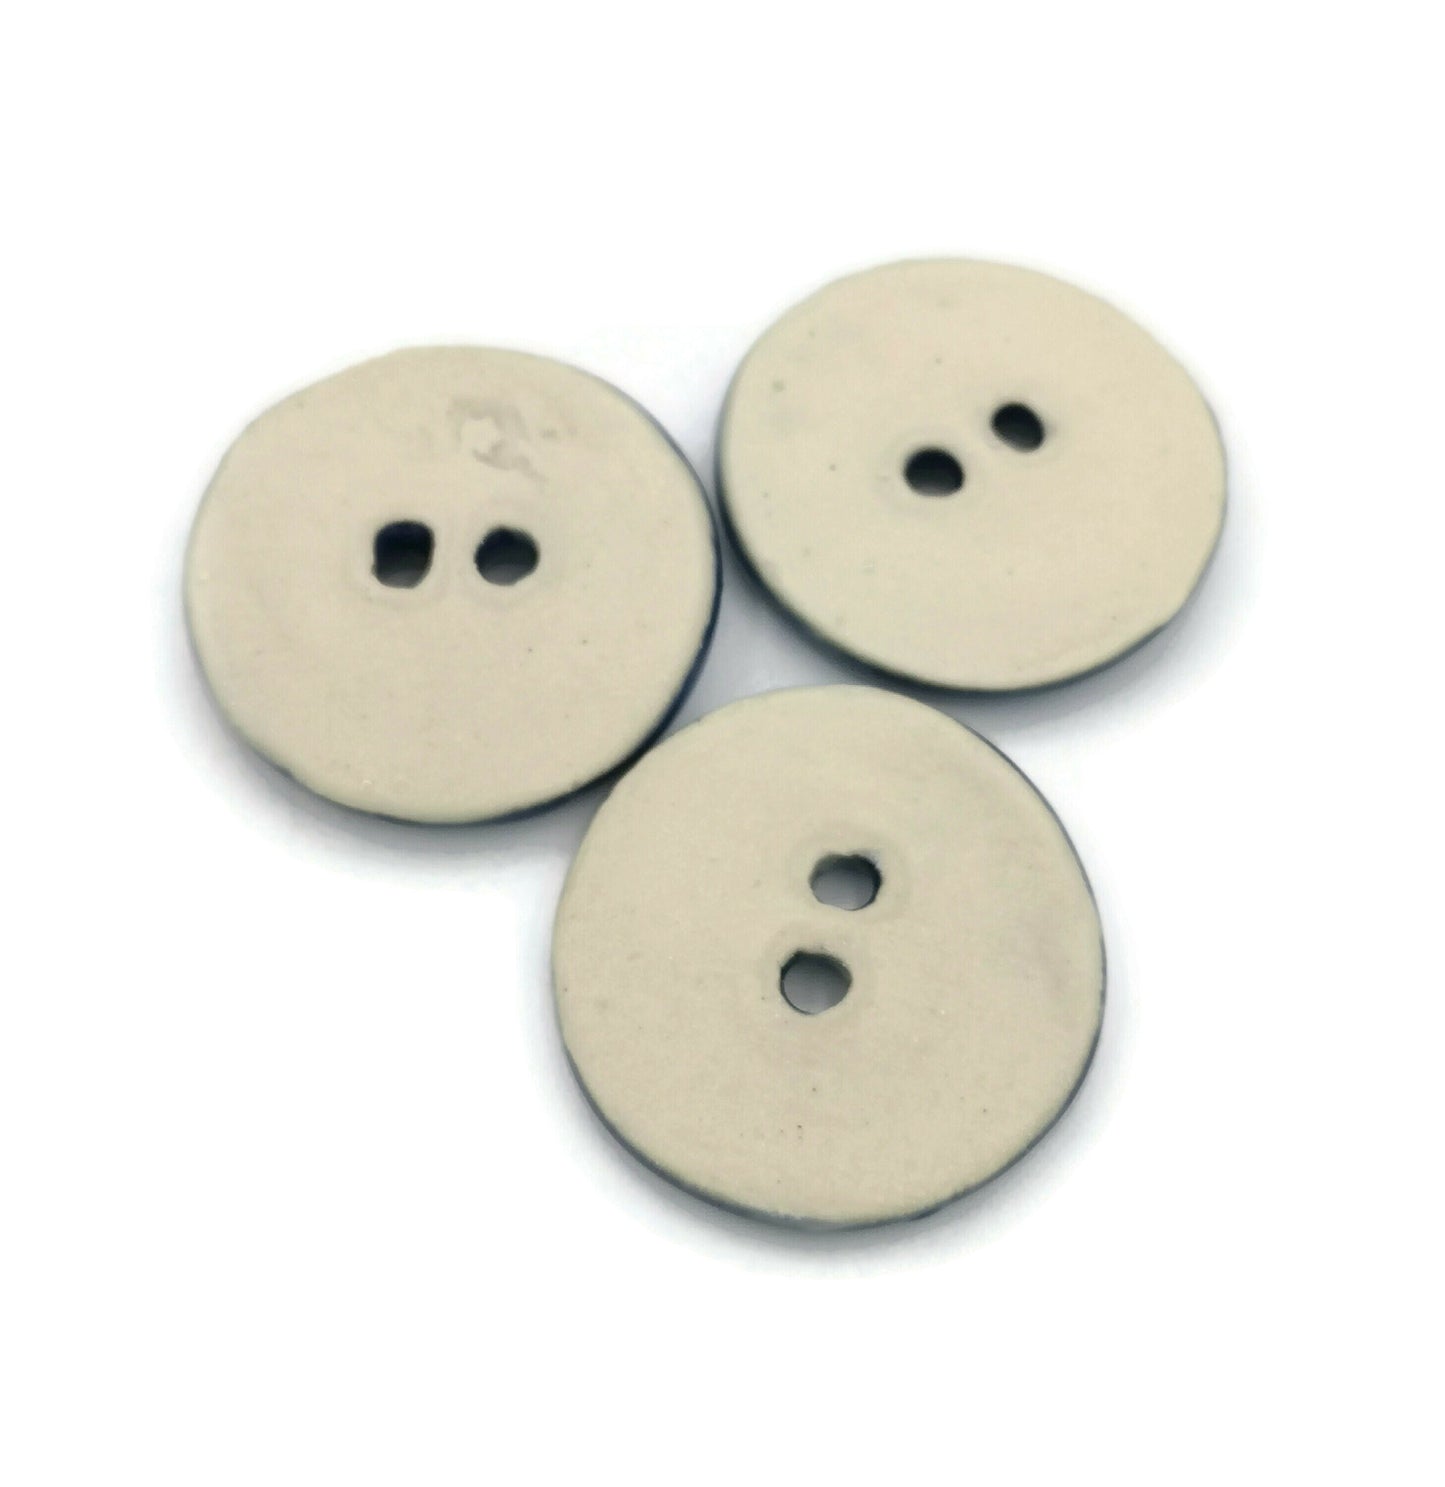 30 mm beautiful button coat, set of 3 handmade ceramic buttons, fancy 2 hole buttons for clothing, best sellers sewing supplies and notions - Ceramica Ana Rafael